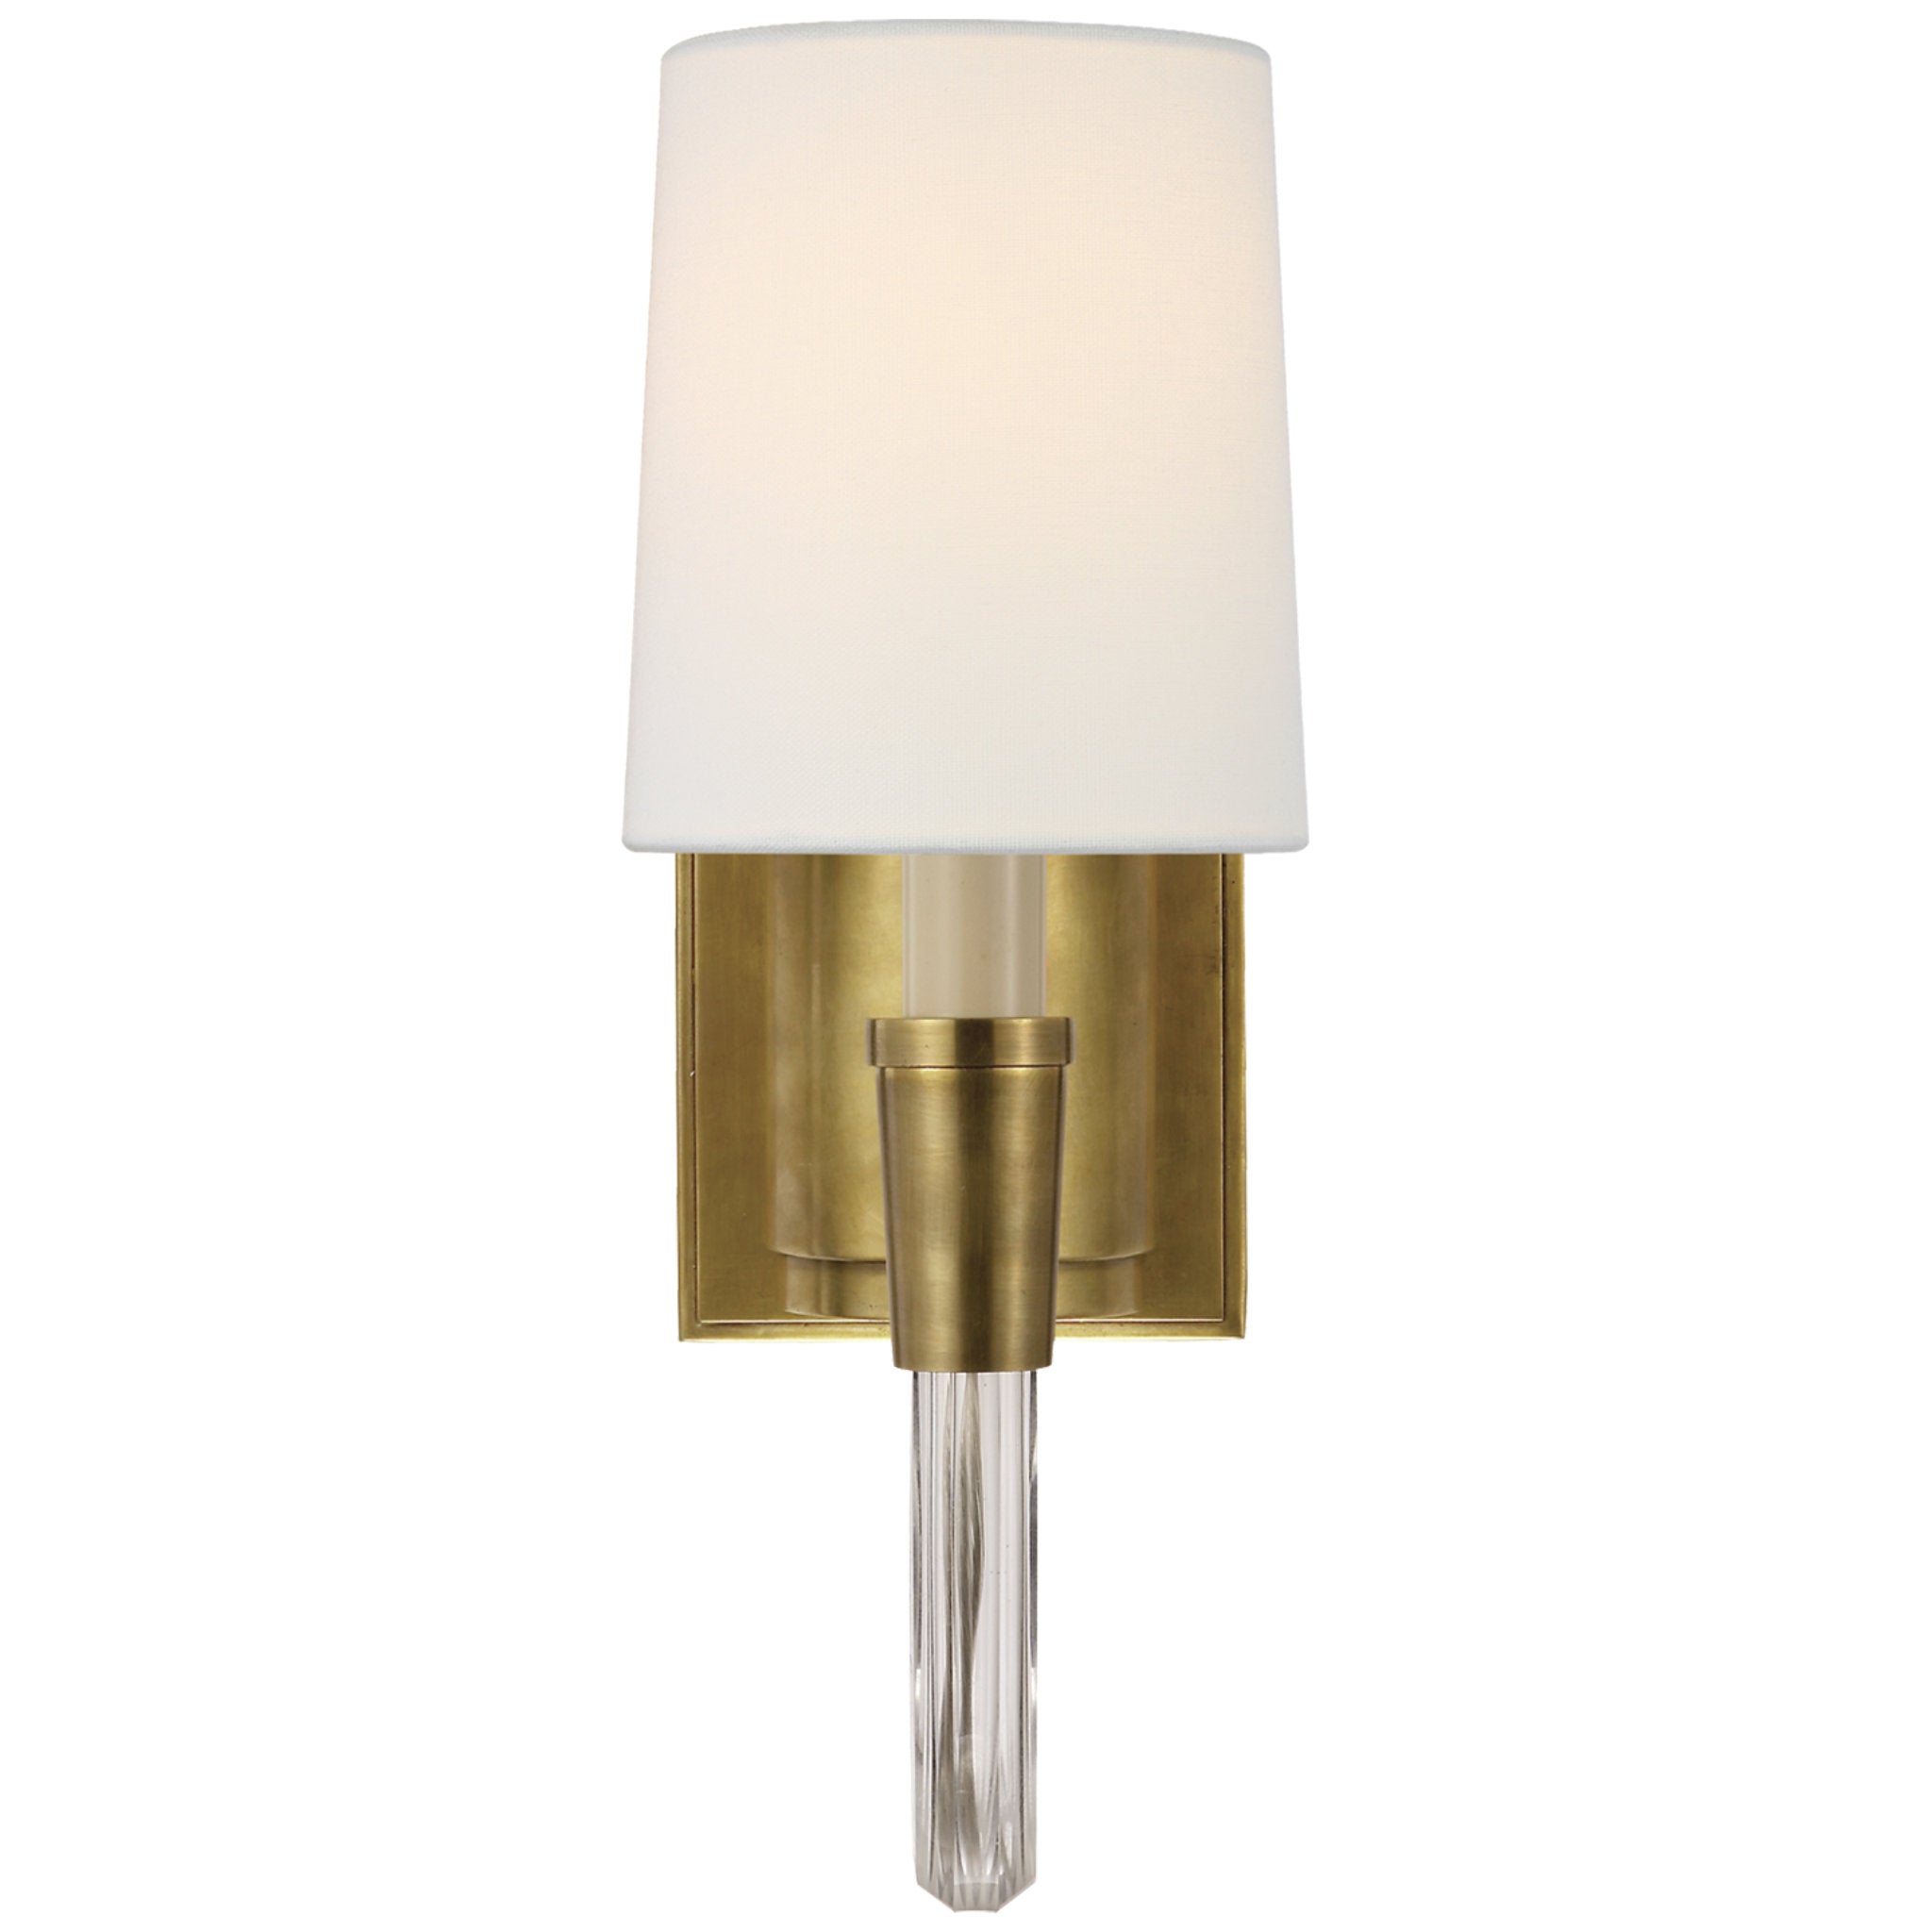 Thomas O'Brien Vivian Single Sconce in Hand-Rubbed Antique Brass with Linen Shade